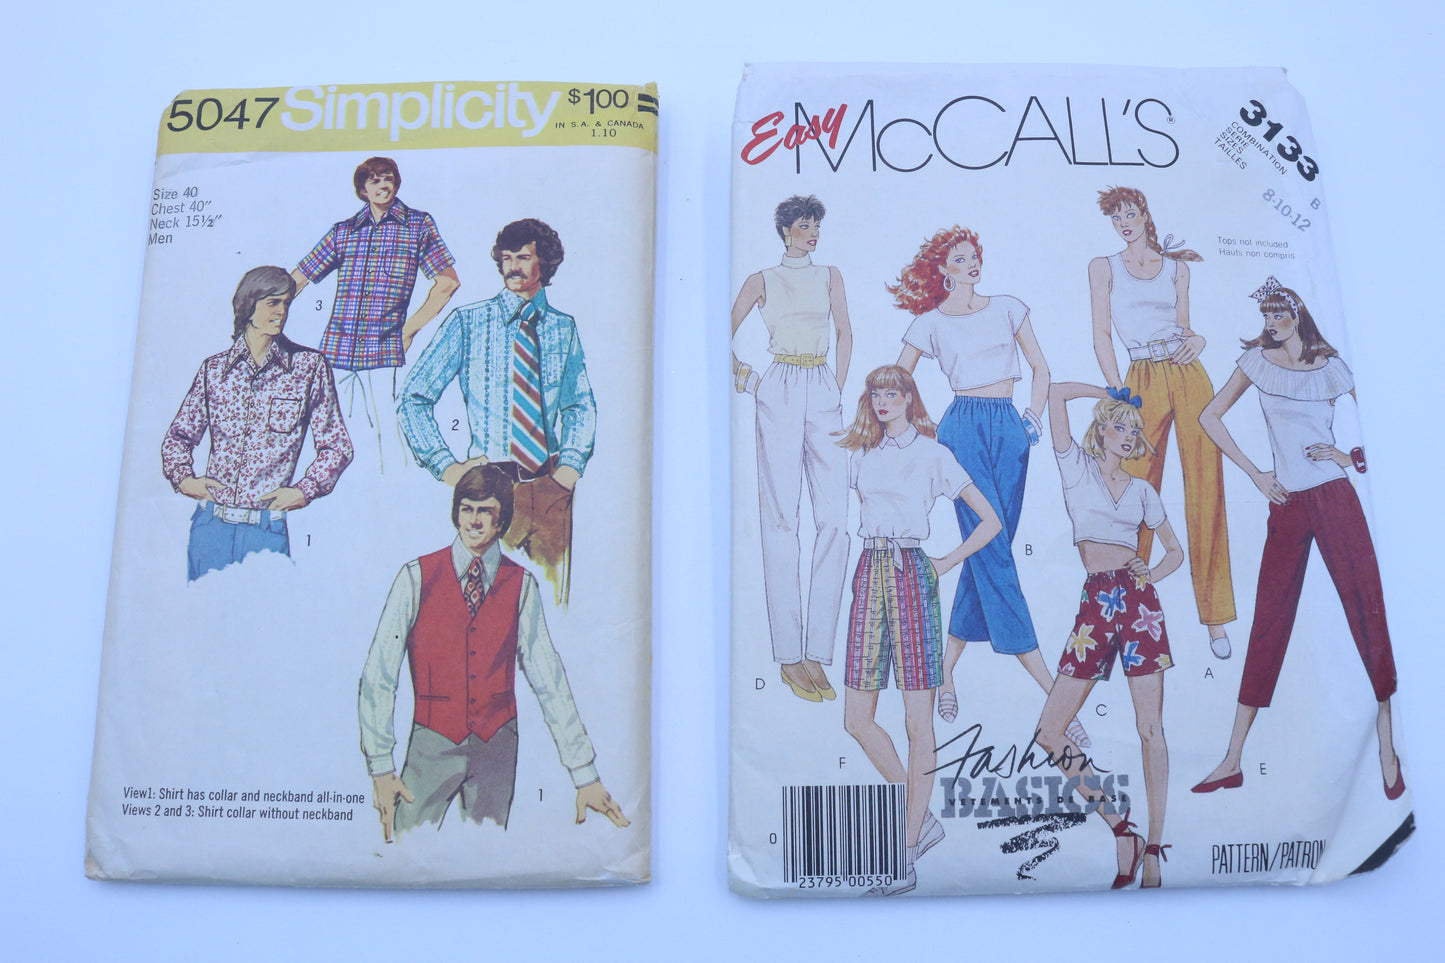 Simplicity 5047 Sewing Pattern or McCalls 3133 Sewing Pattern